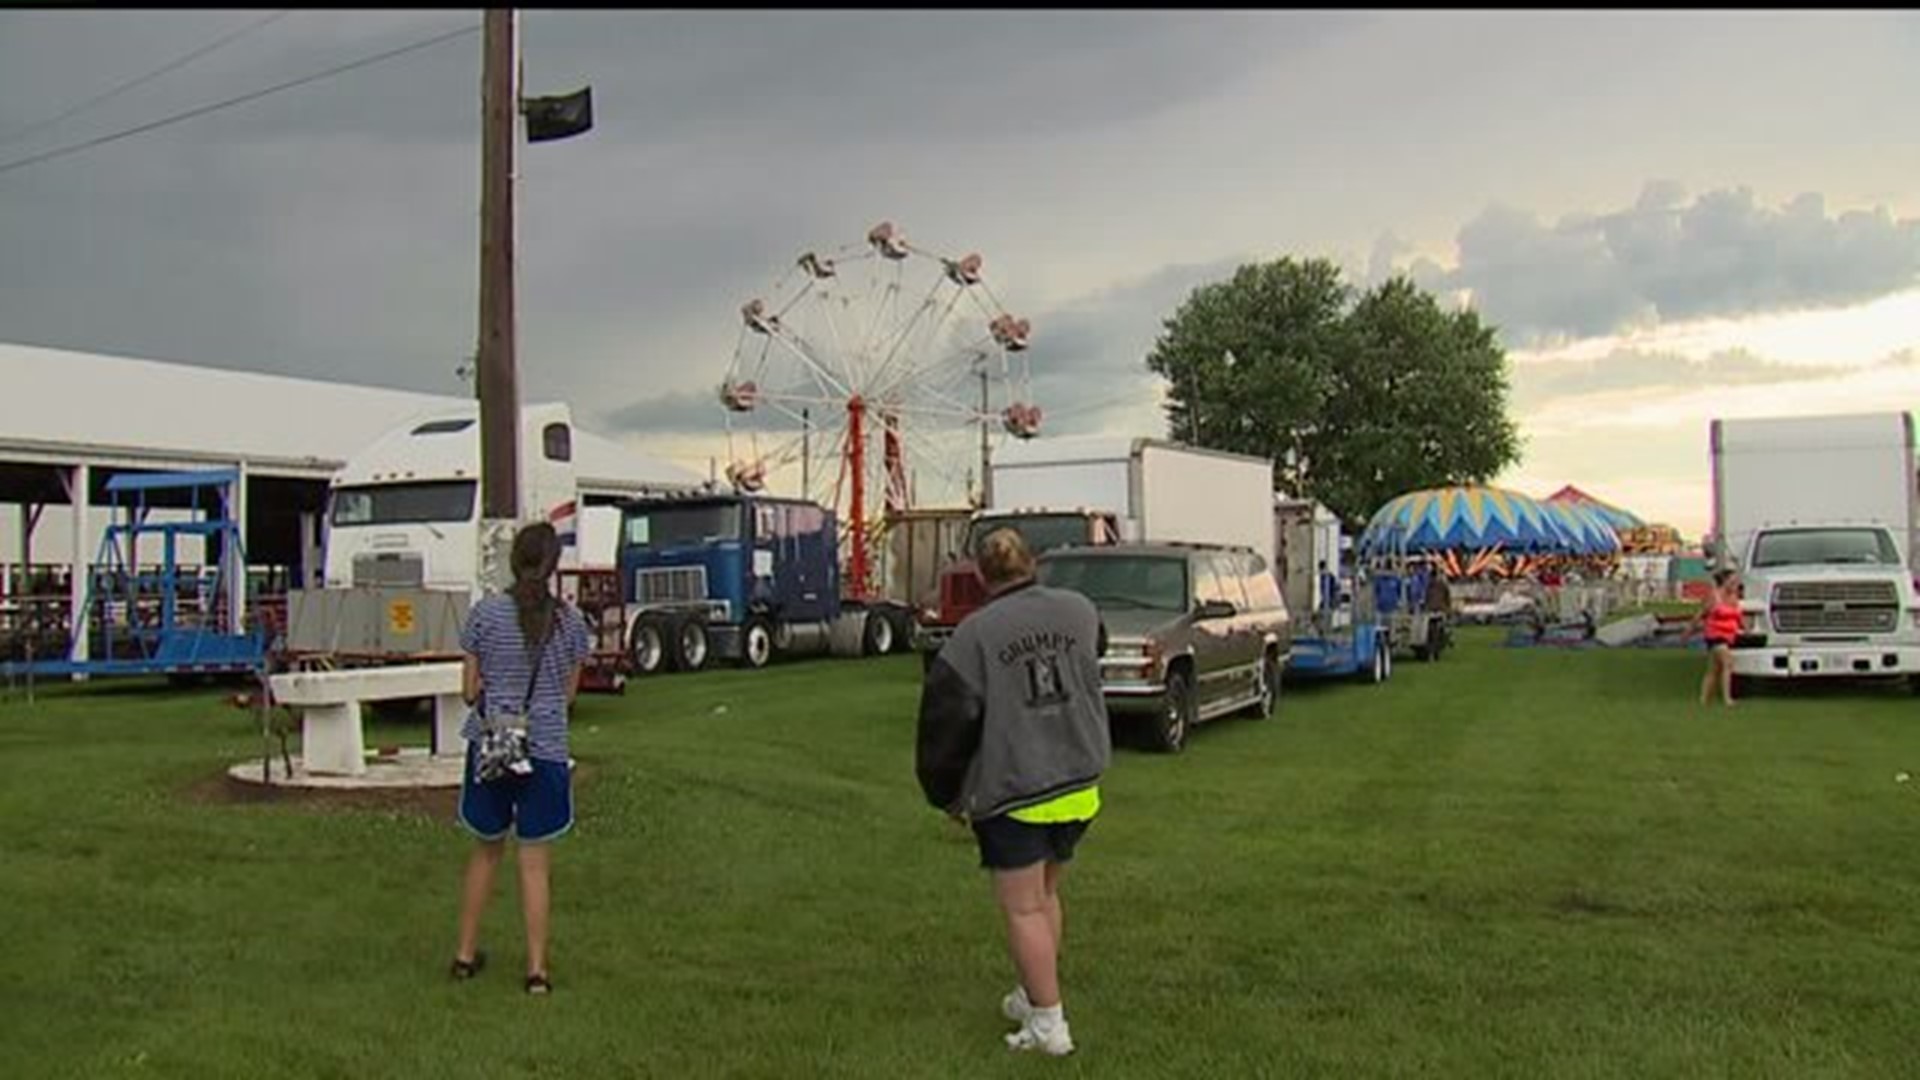 Storm rips through Mercer County Fair on Kids’ Day